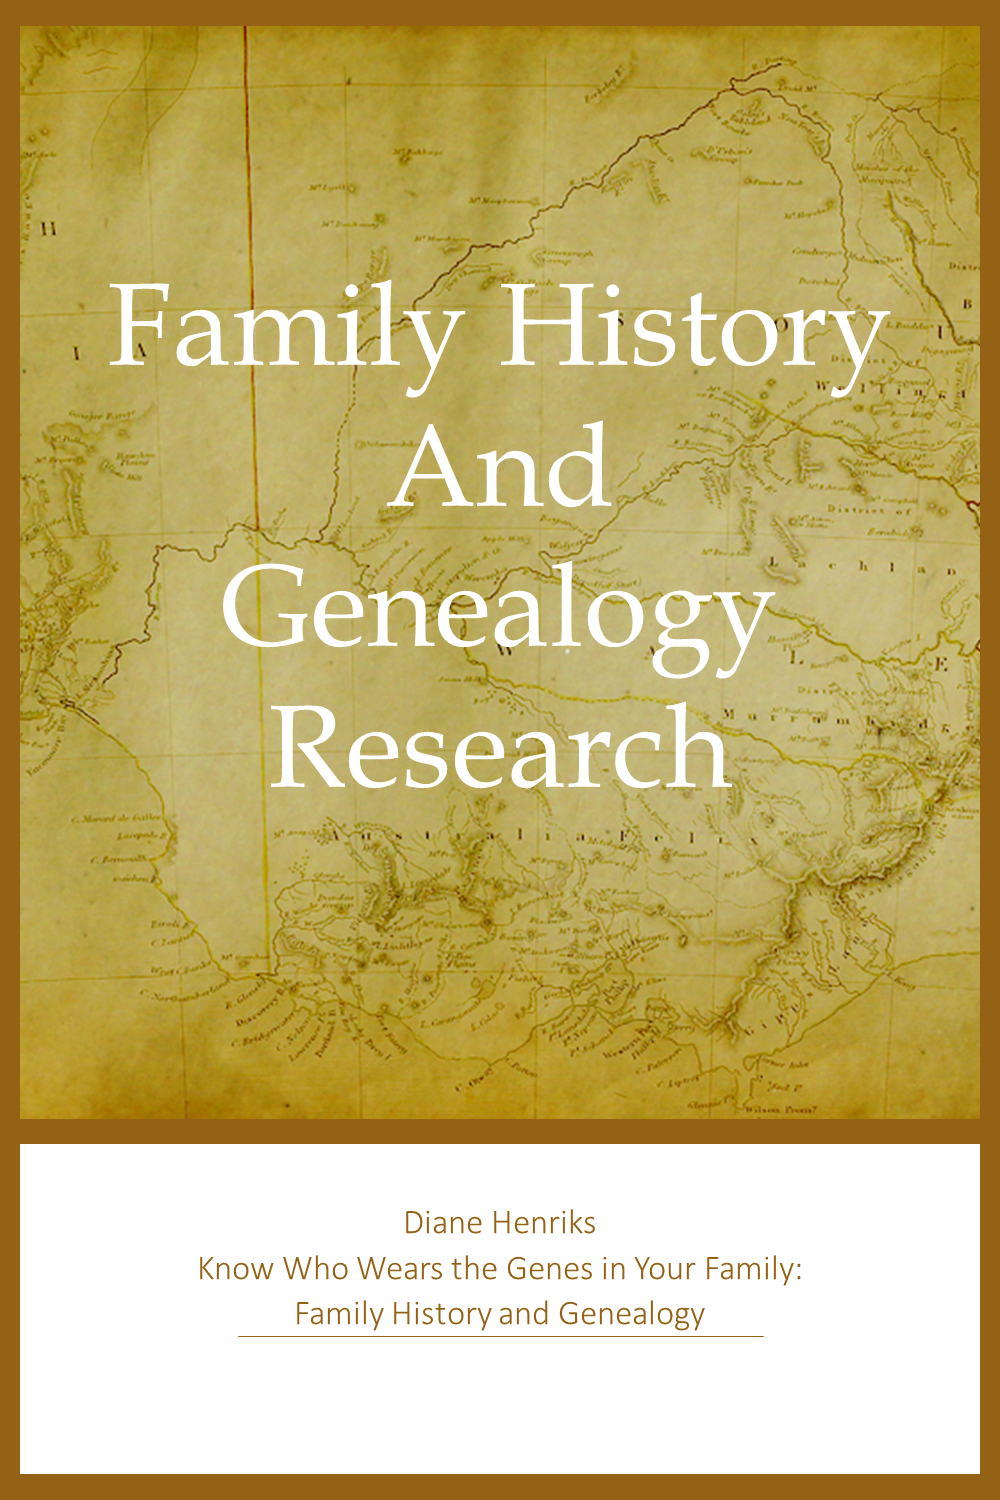 Family History and Genealogy Research by Diane Henriks at Know Who Wears the Genes in Your Family